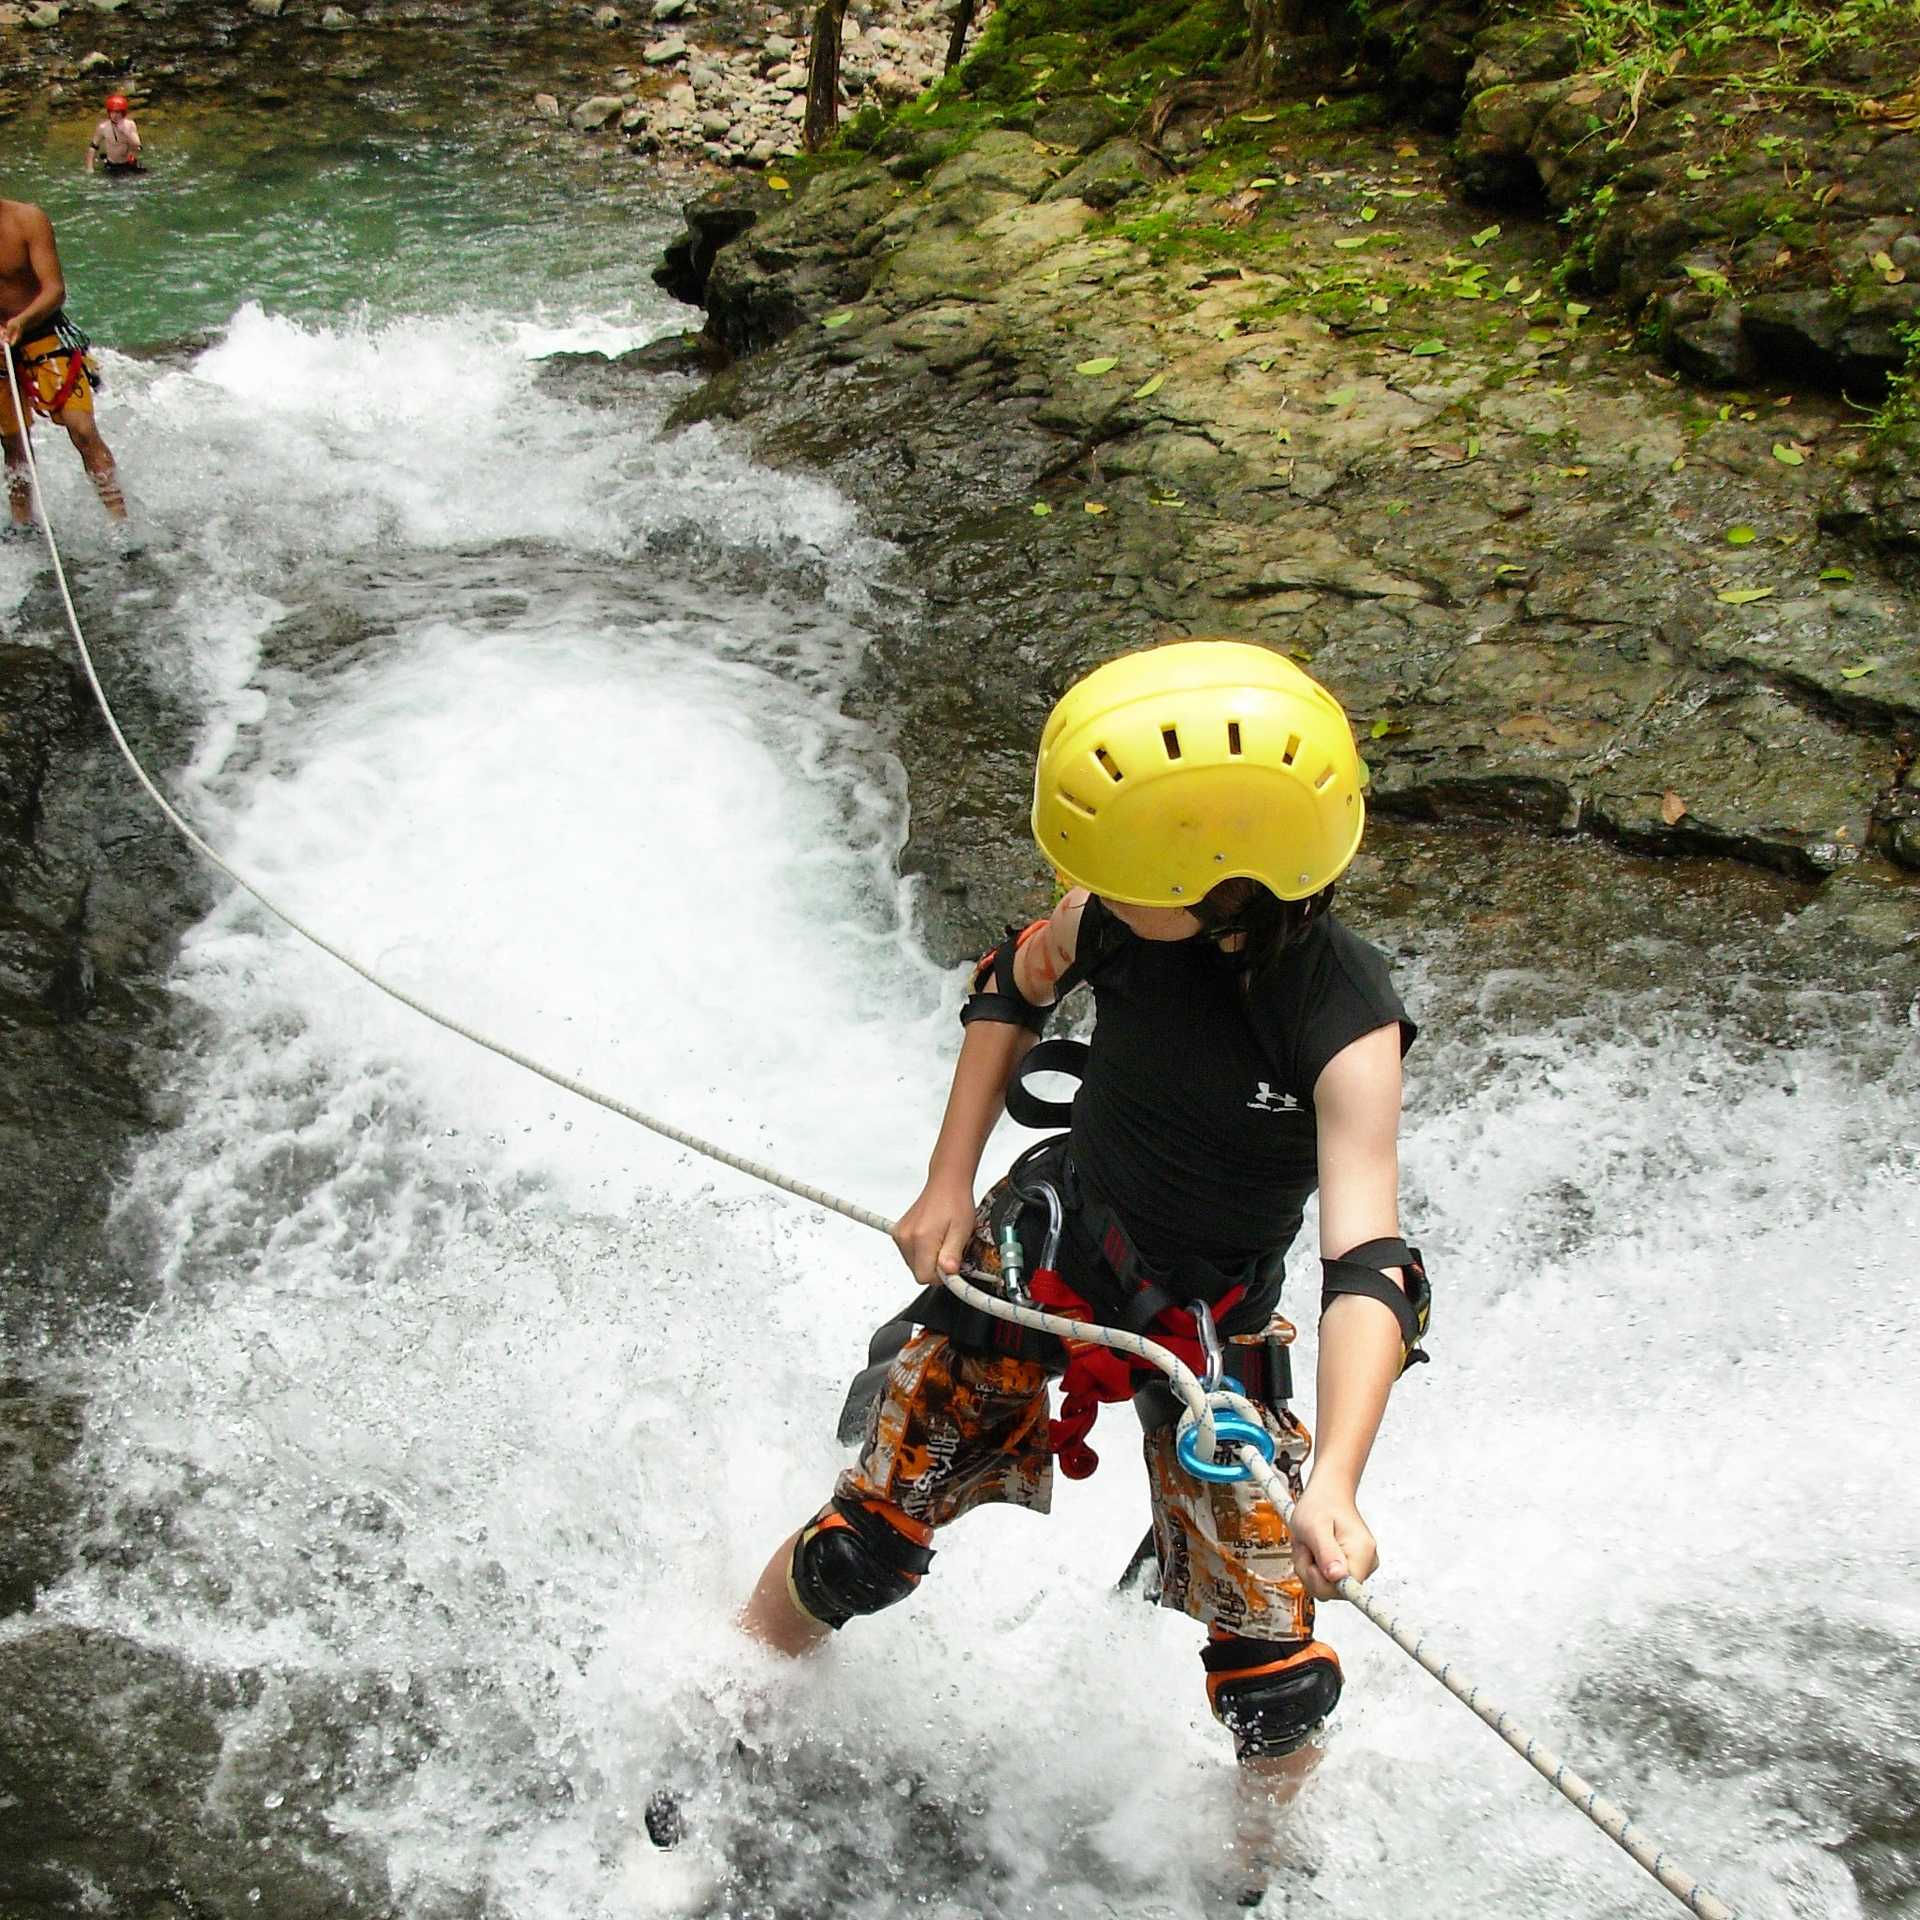 A child doing rappel down a river